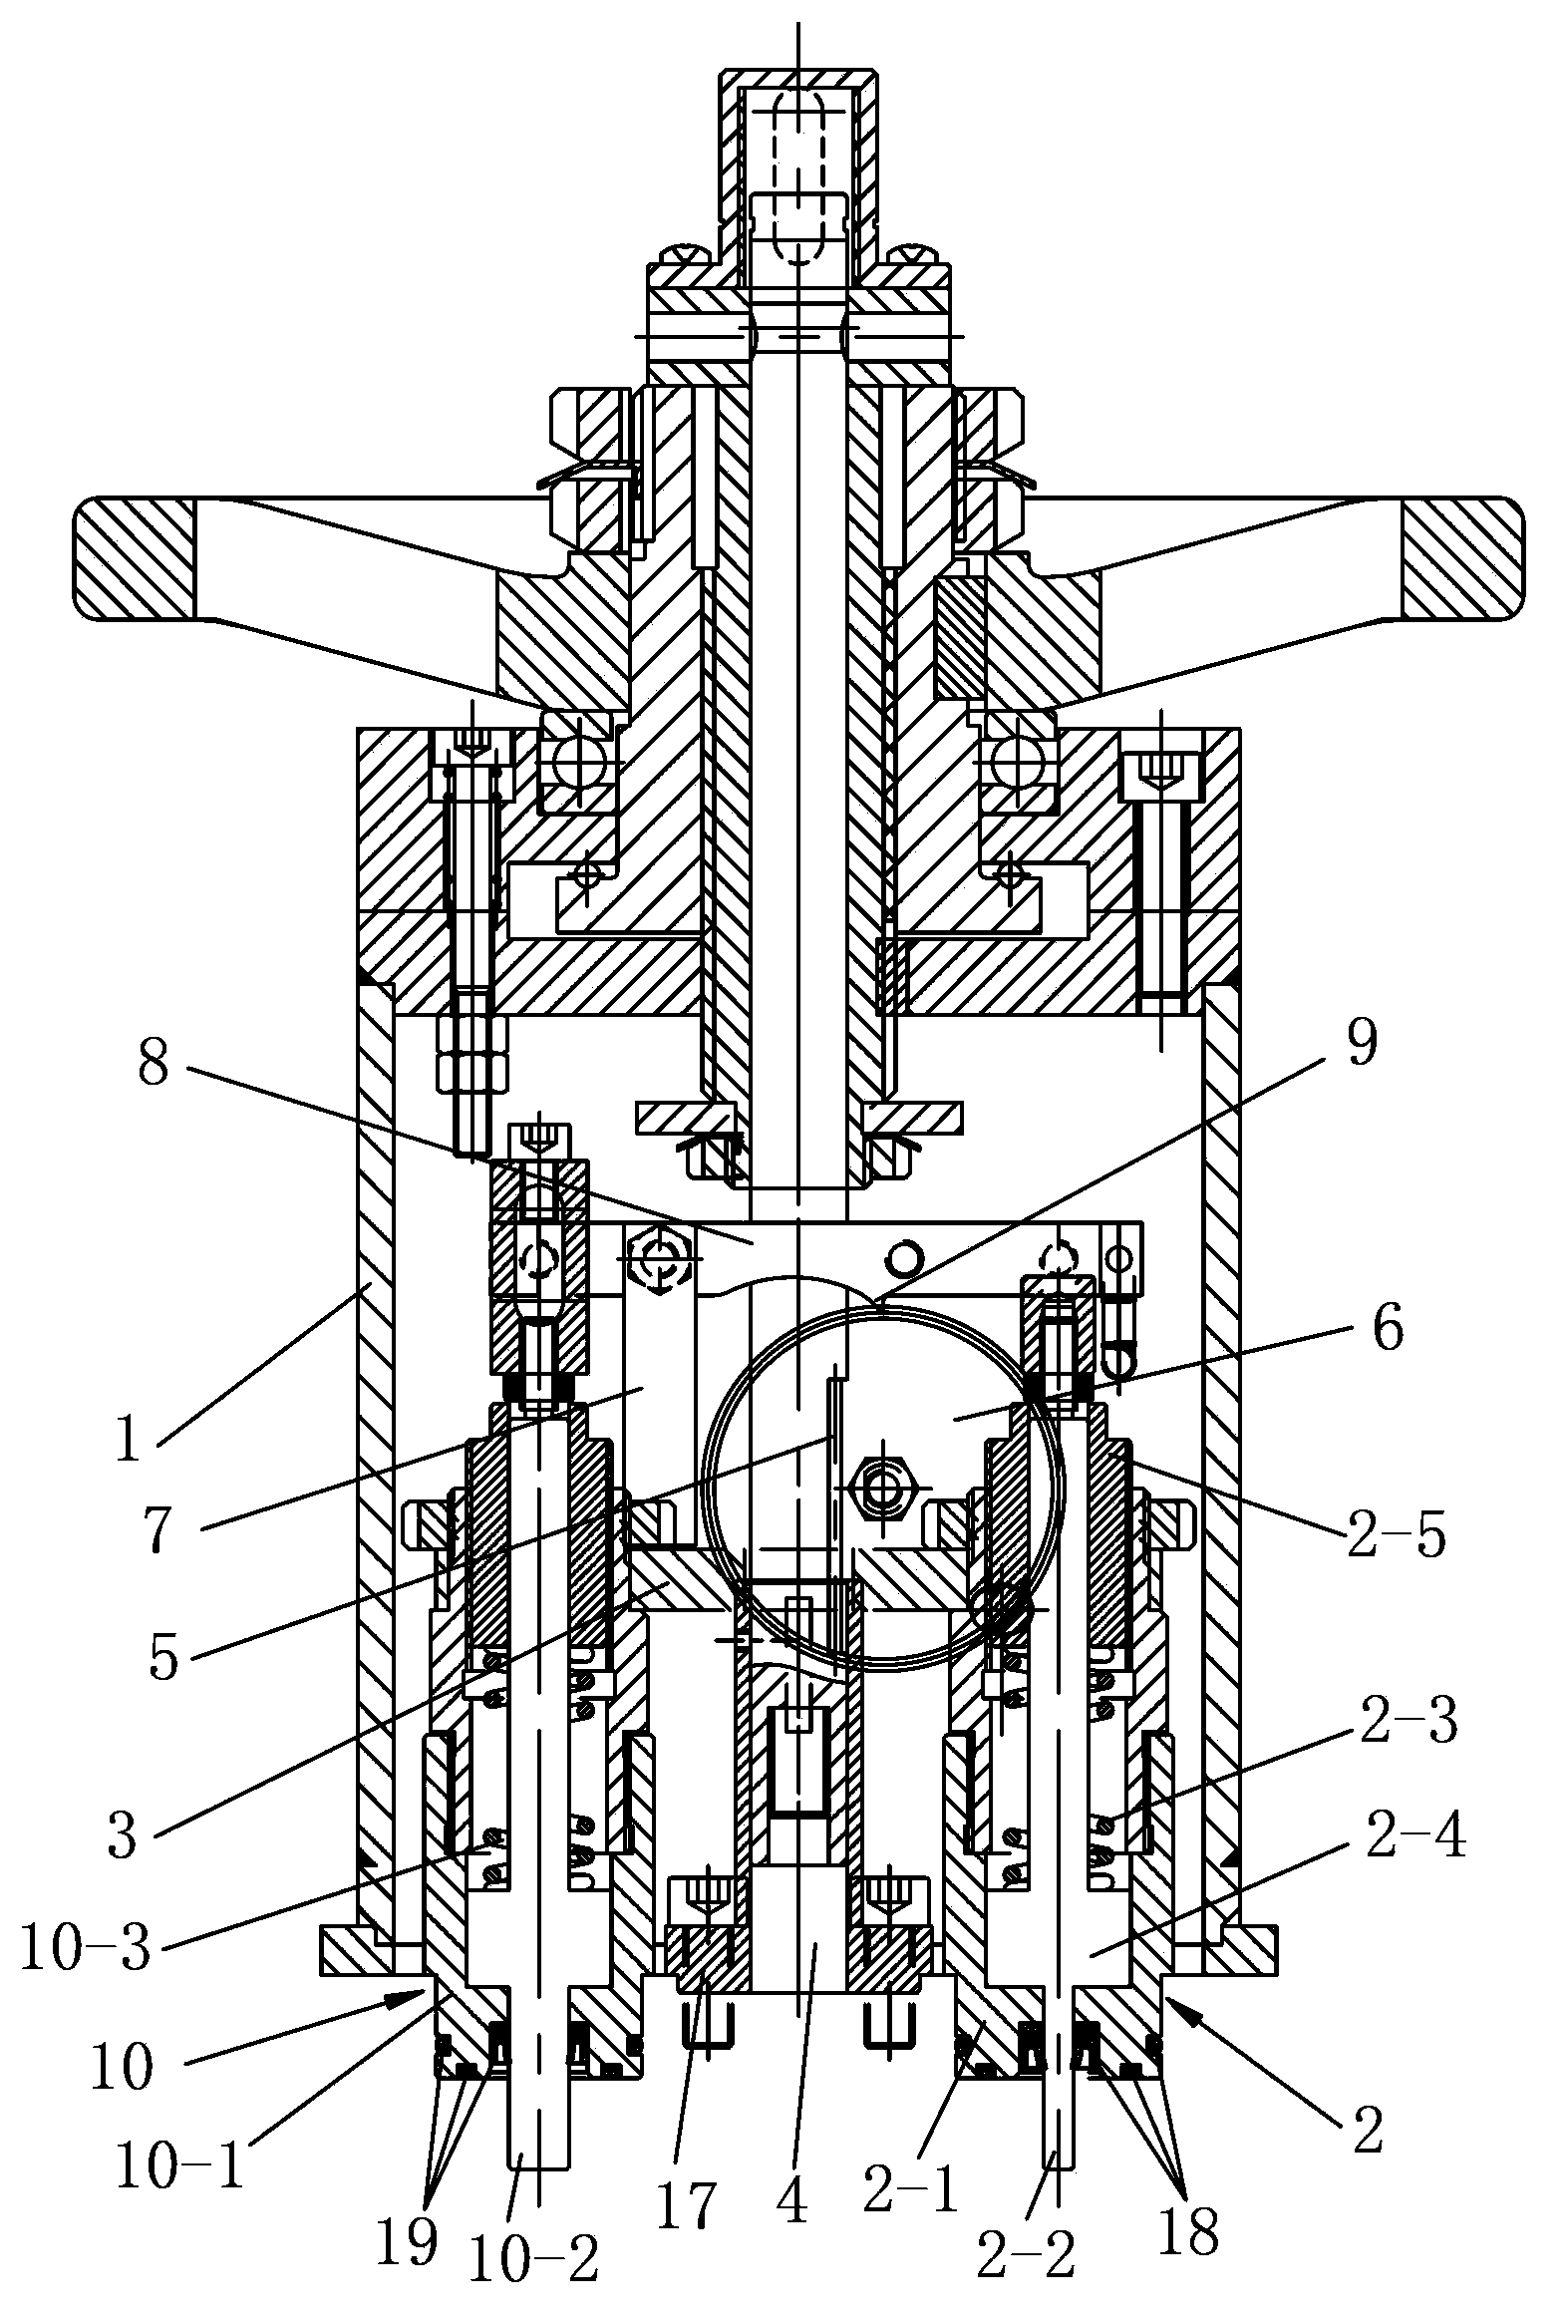 Pilot-operated type solenoid valve for gas well wellhead and valve plug lifting mechanism